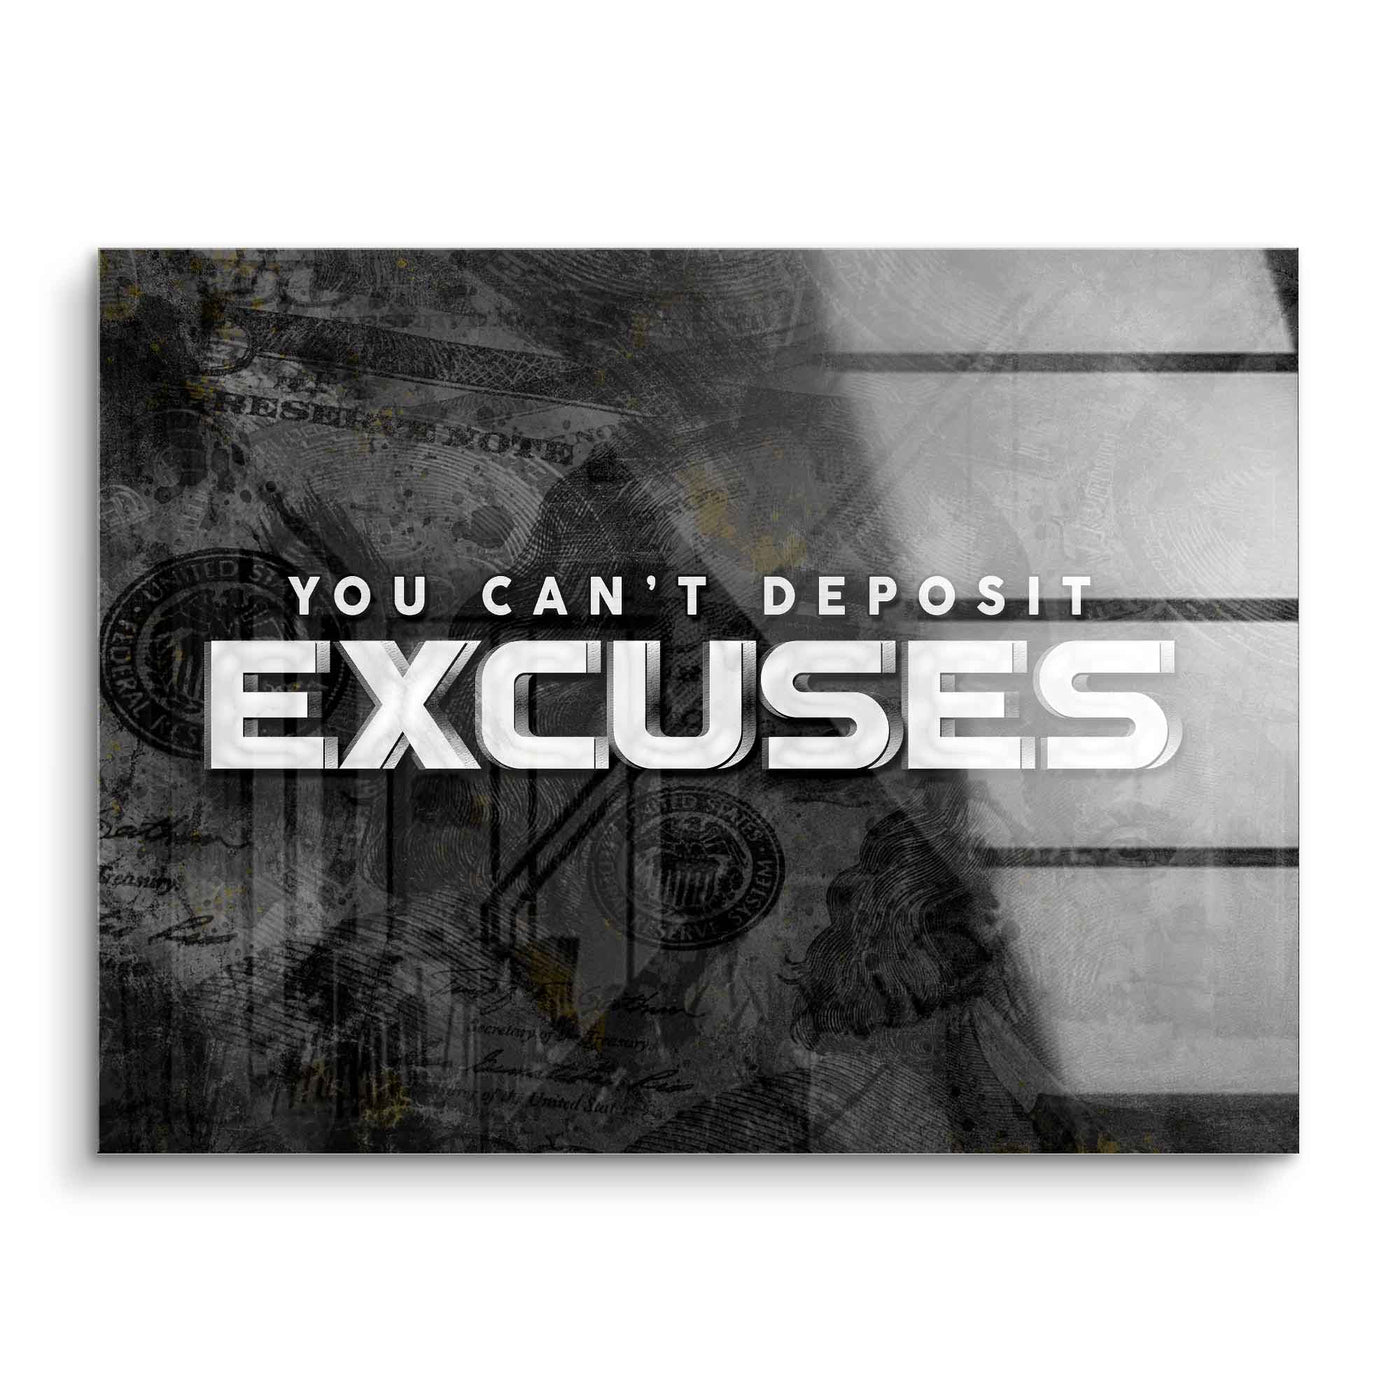 You can't deposit excuses